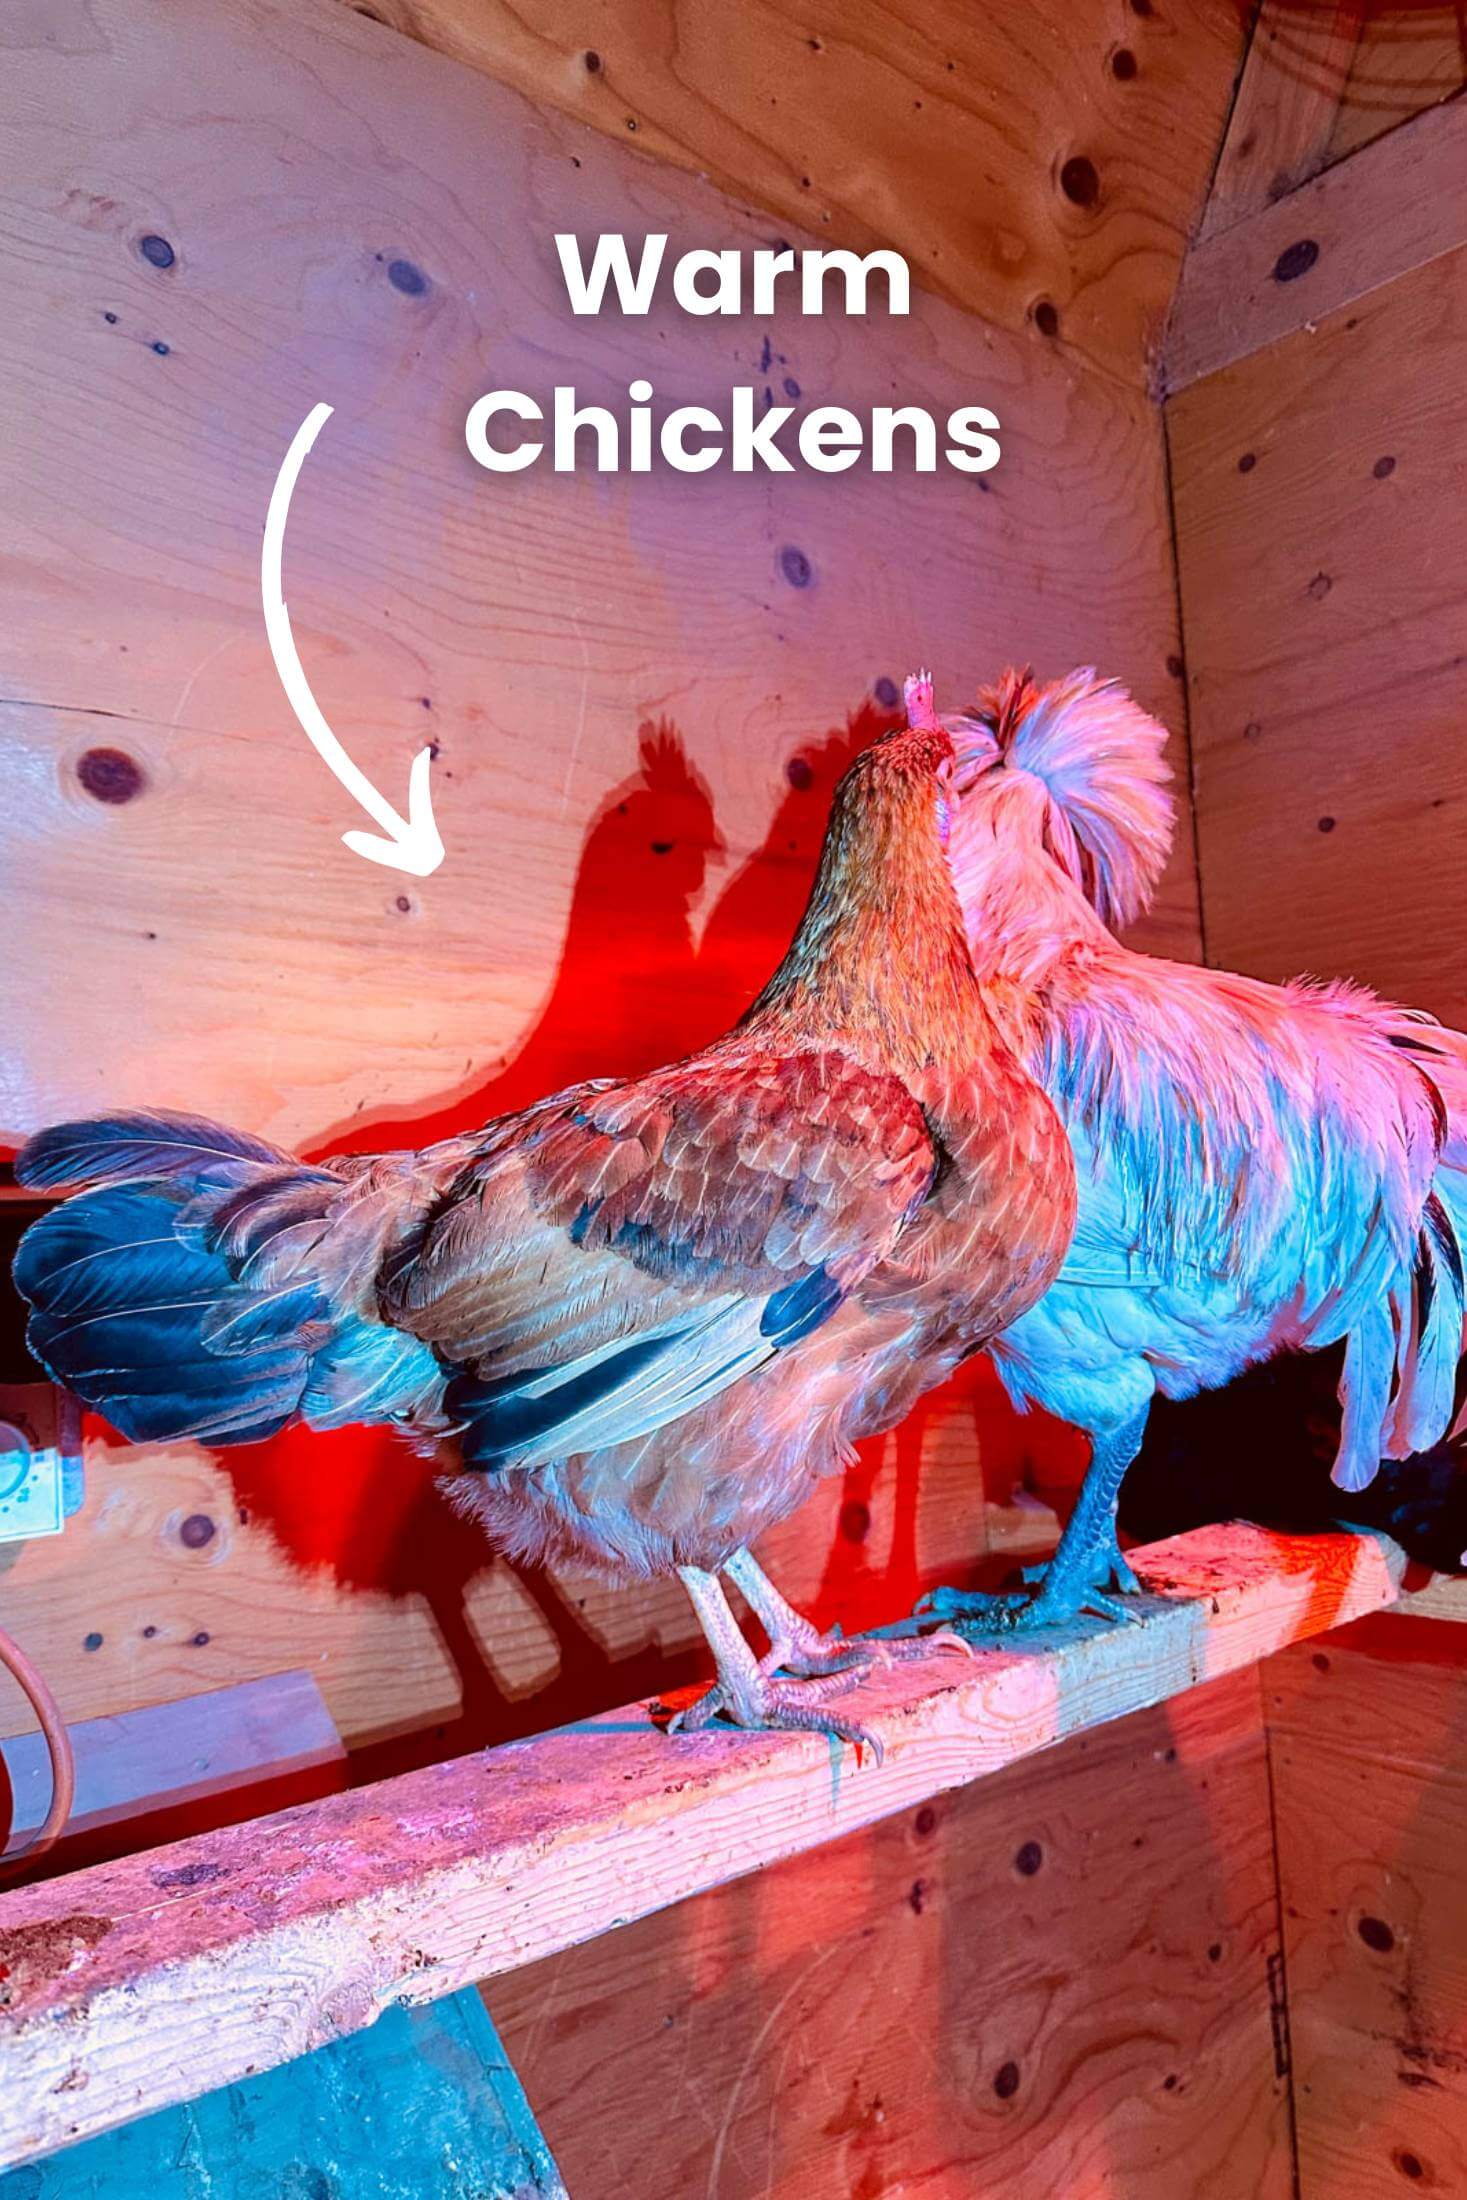 Chickens on roosting bars under heat lamps. 